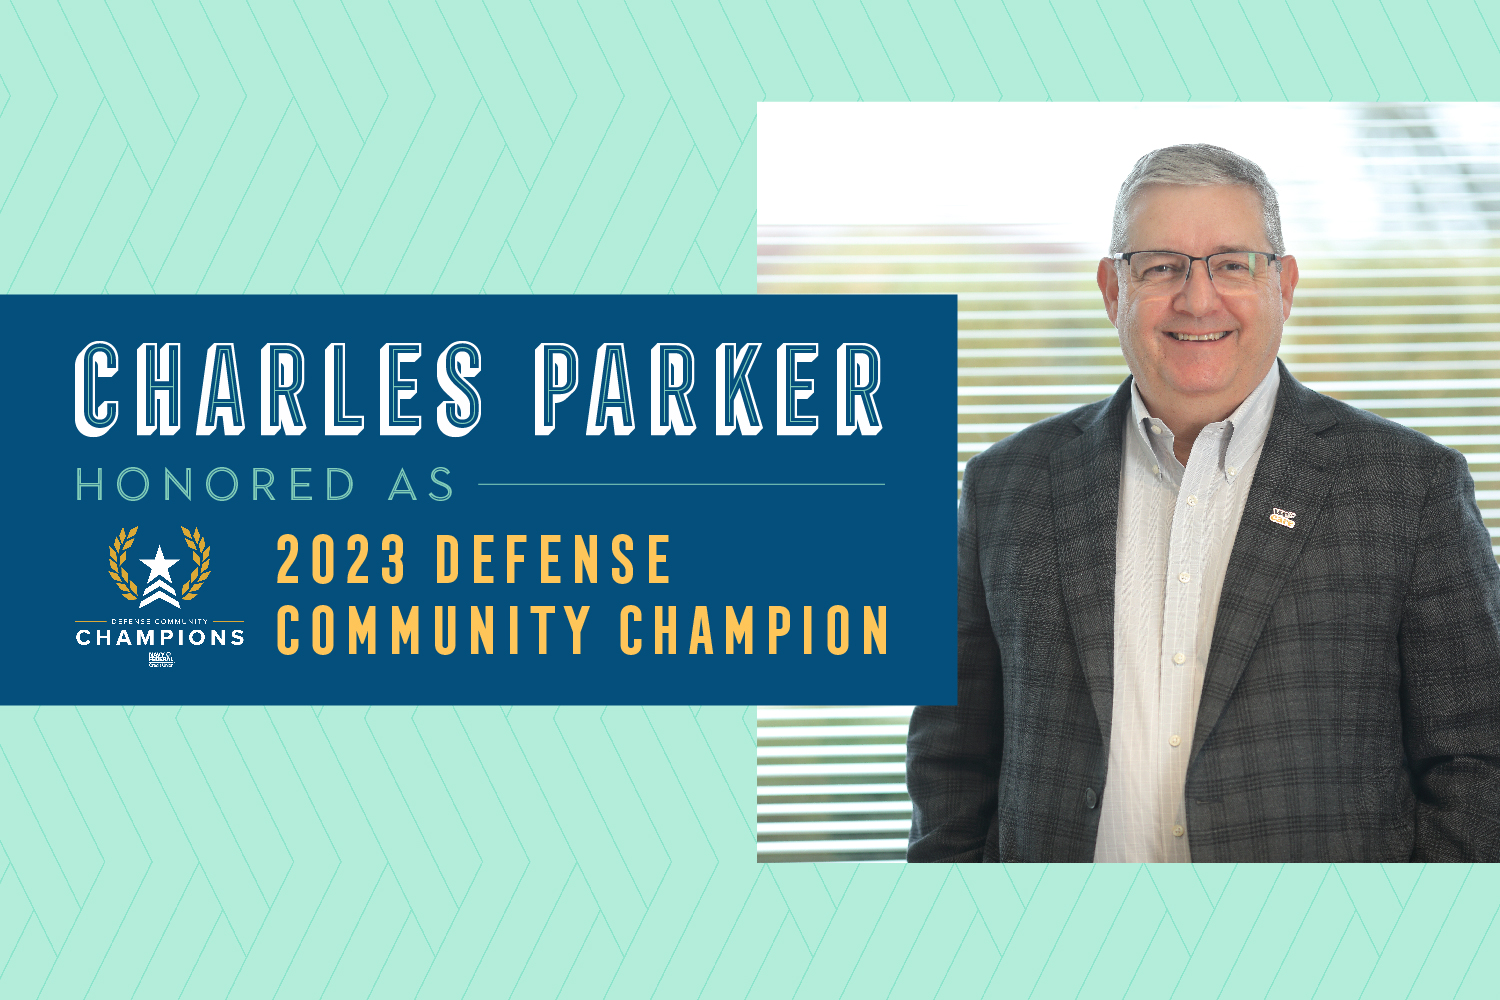 Balfour Beatty Communities Senior Vice President, Charles “Chuck” Parker Honored as 2023 National Defense Community Champion